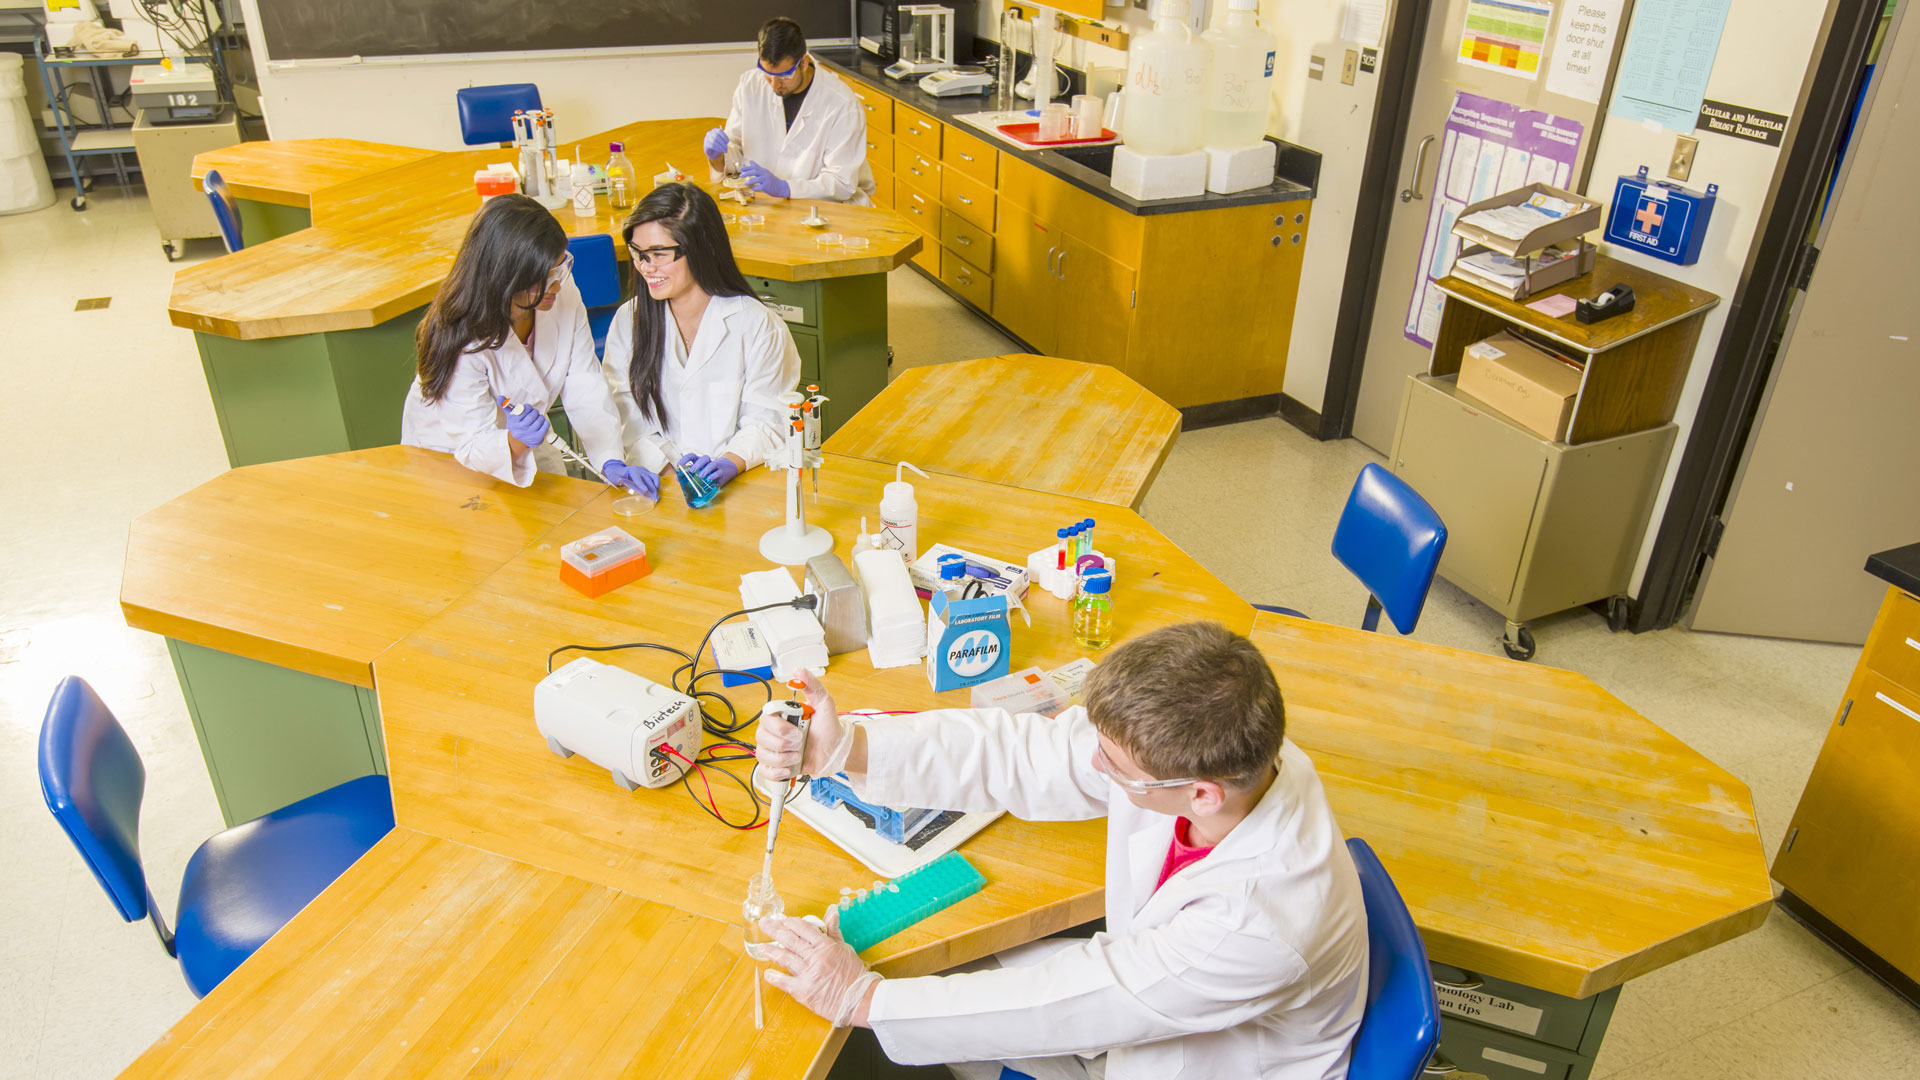 UHCL students at work in a biology lab.